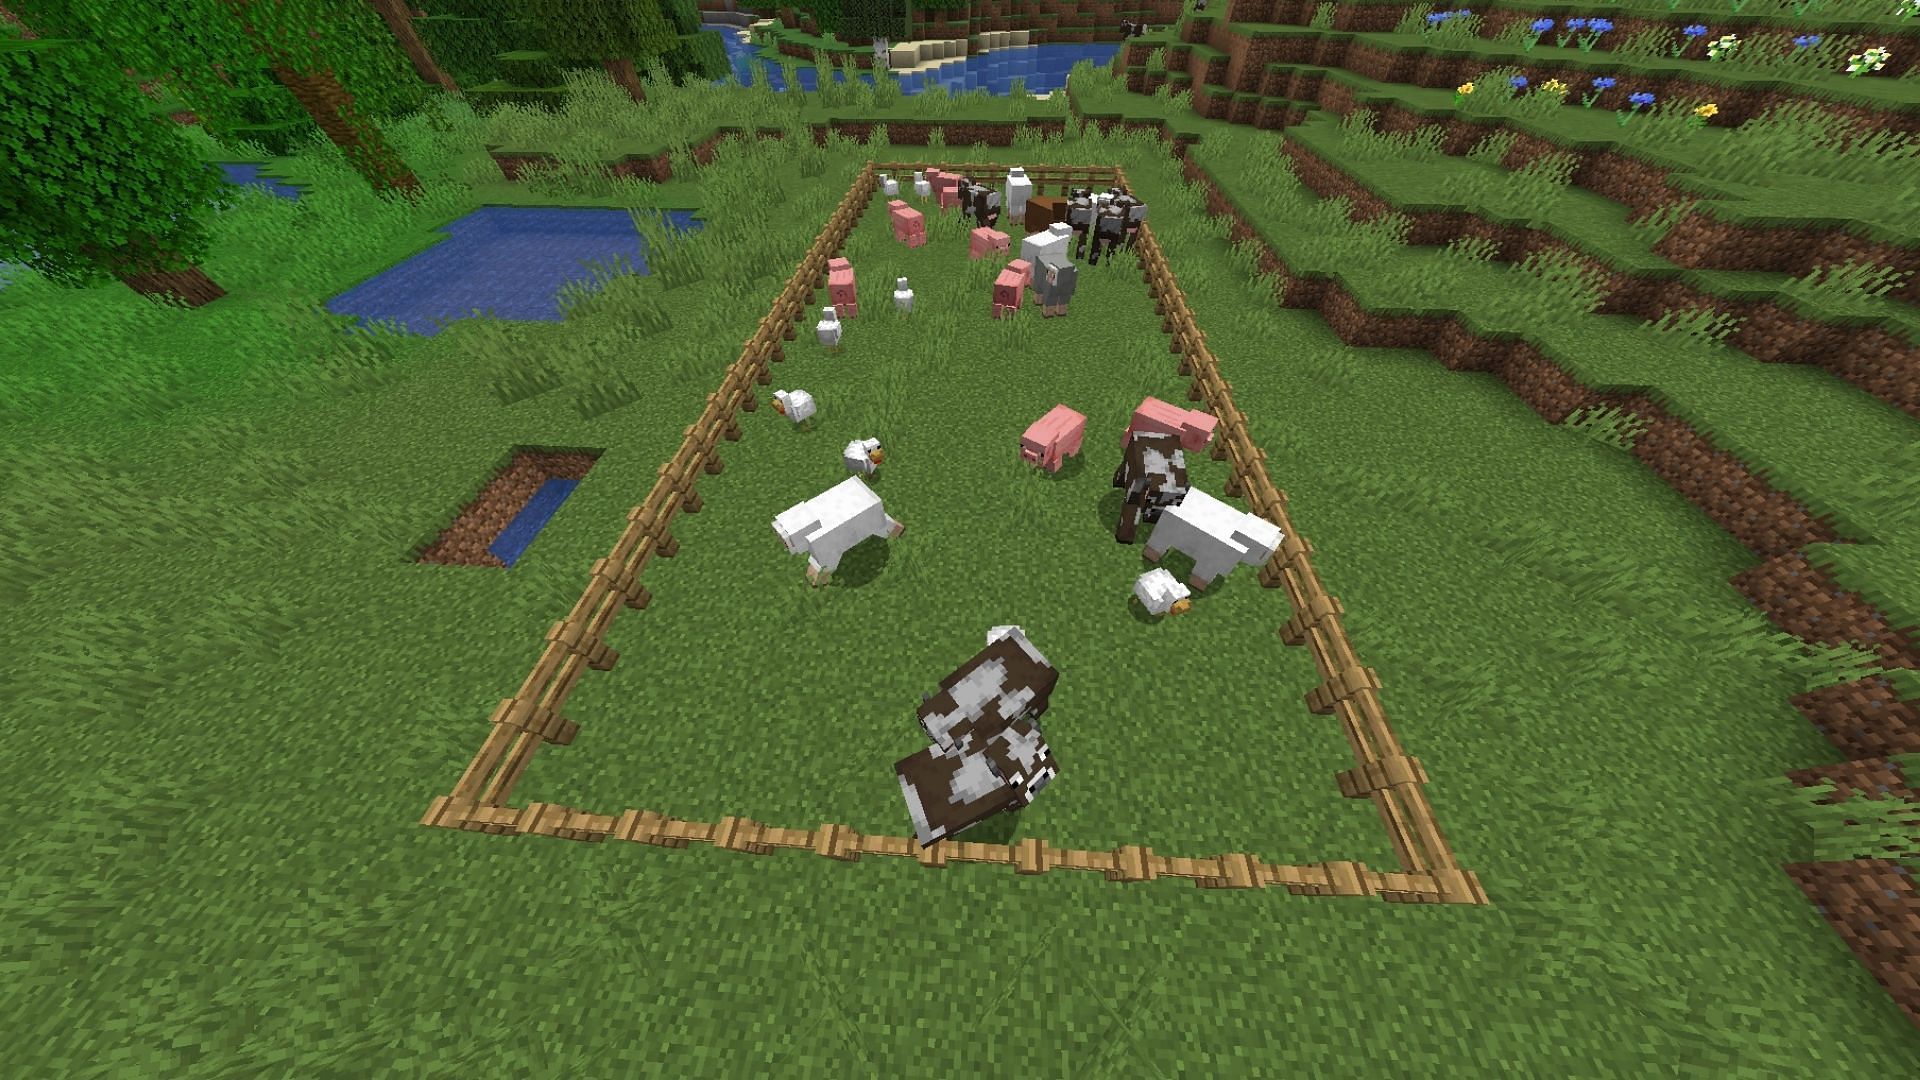 Simple animal farms can be made in Minecraft 1.19 (Image via Fandom Wiki)